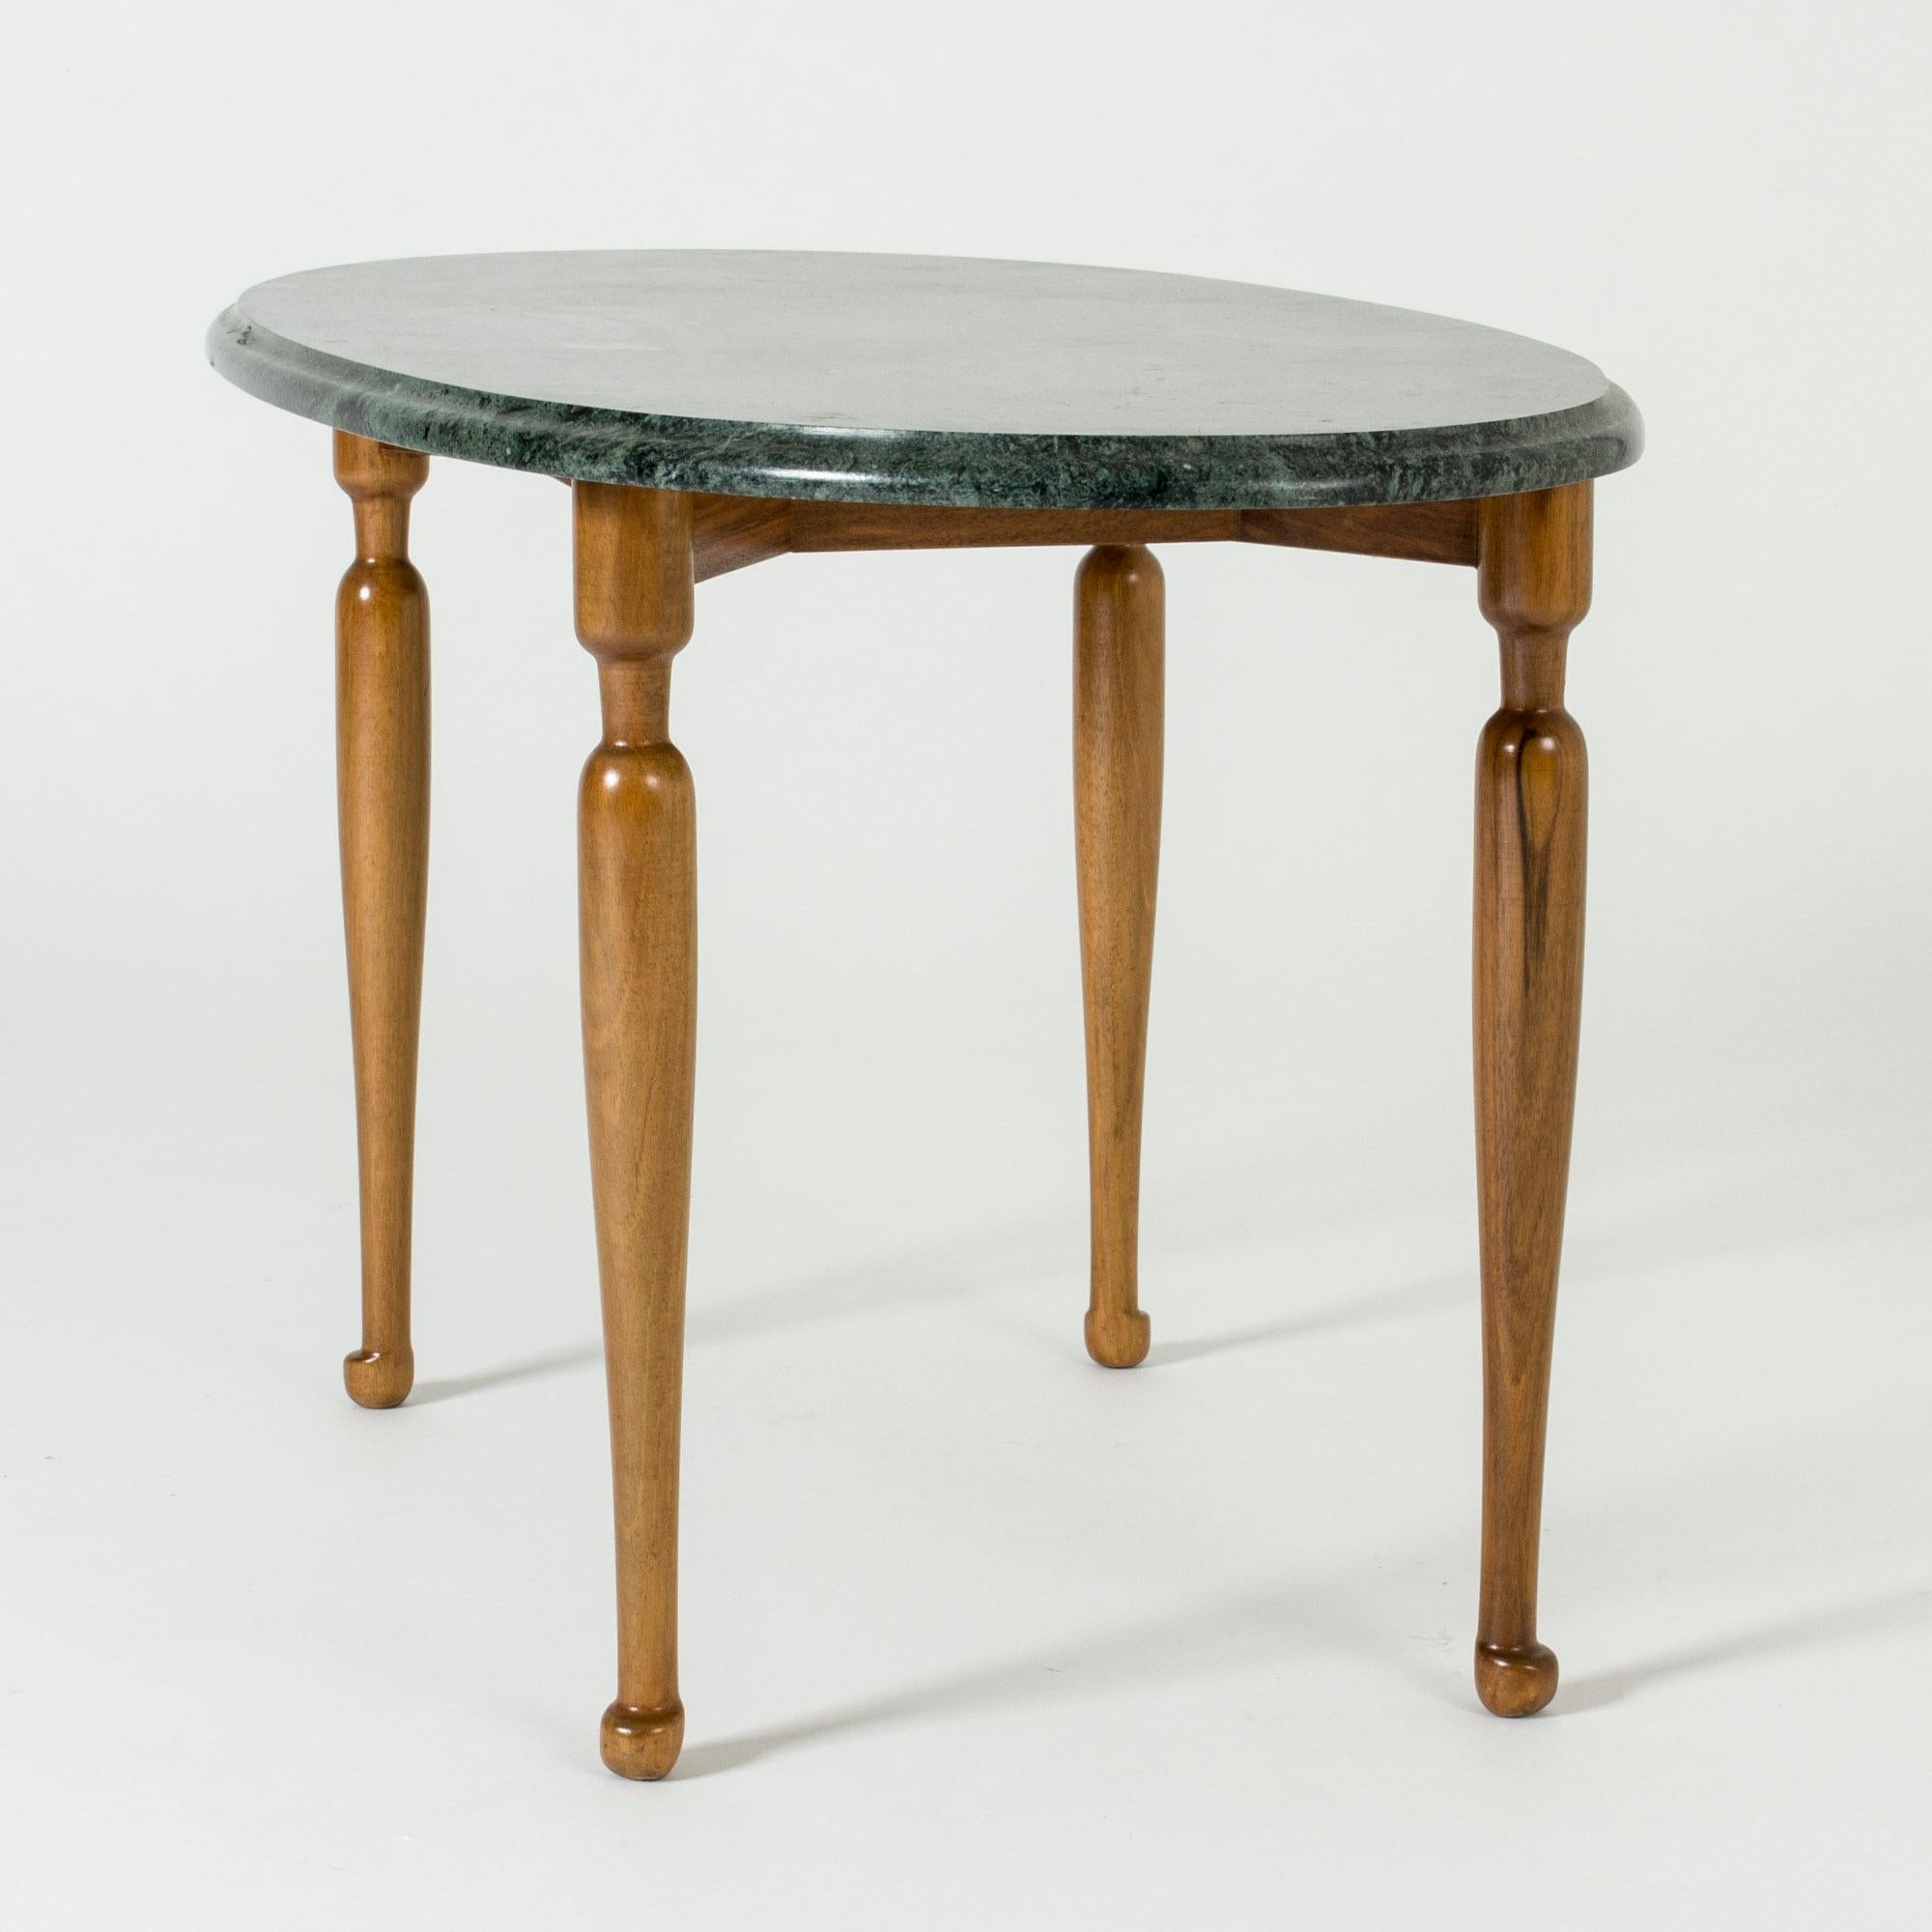 Beautiful side table by Josef Frank, with an oval green marble table top on a slender mahogany base. Deep green marble, lovely sculpted legs and feet.